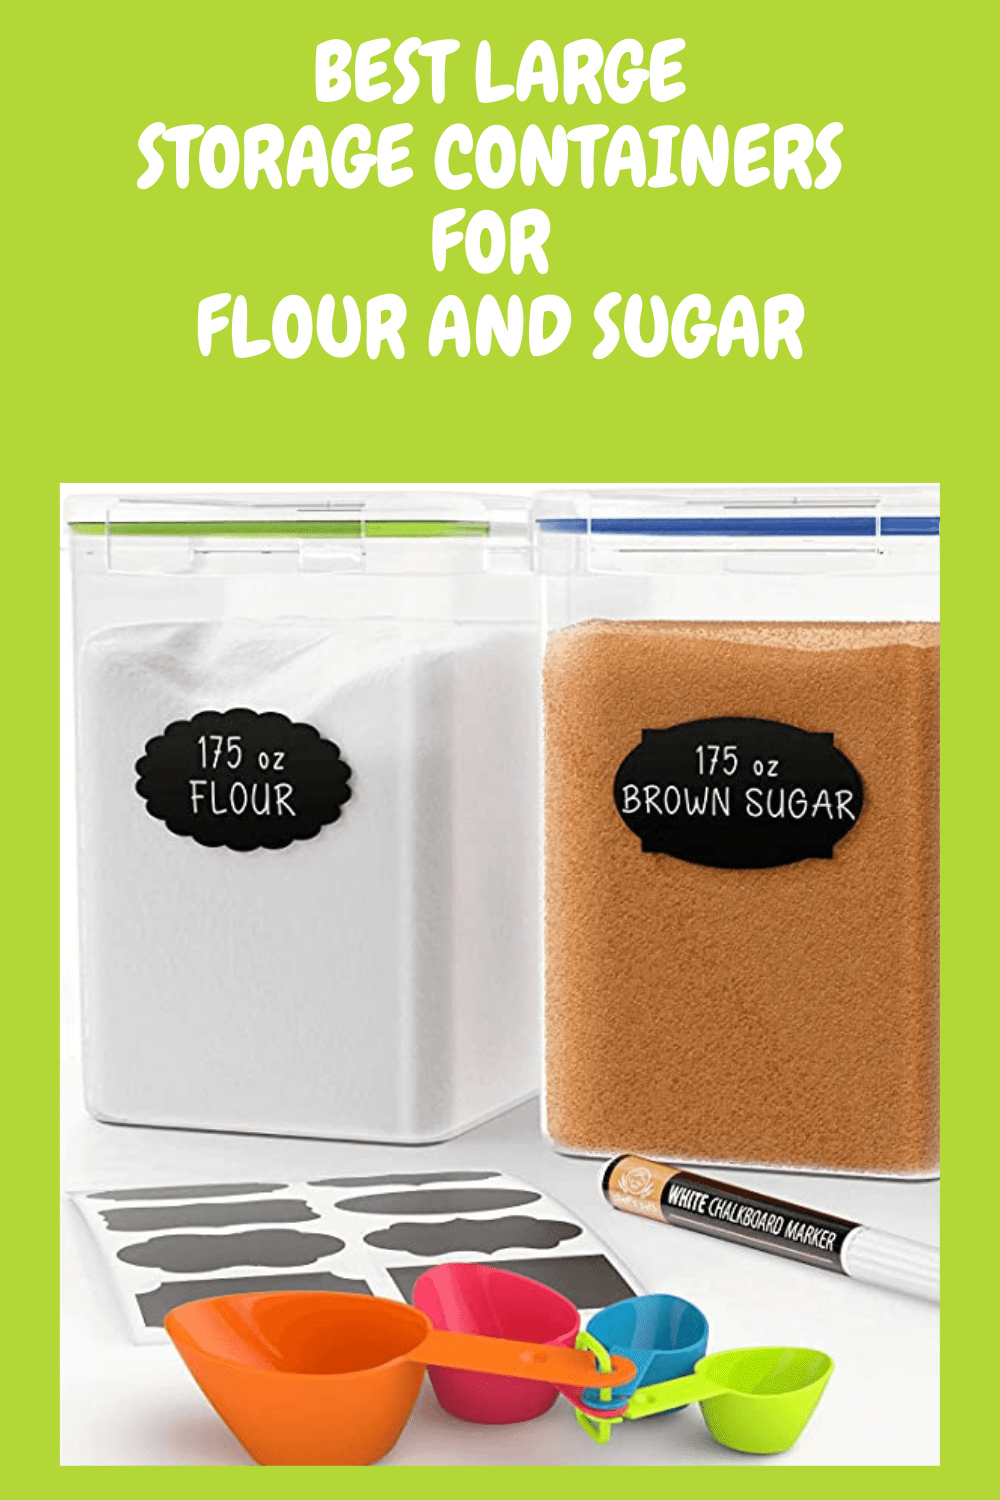 Flour and sugar storage containers